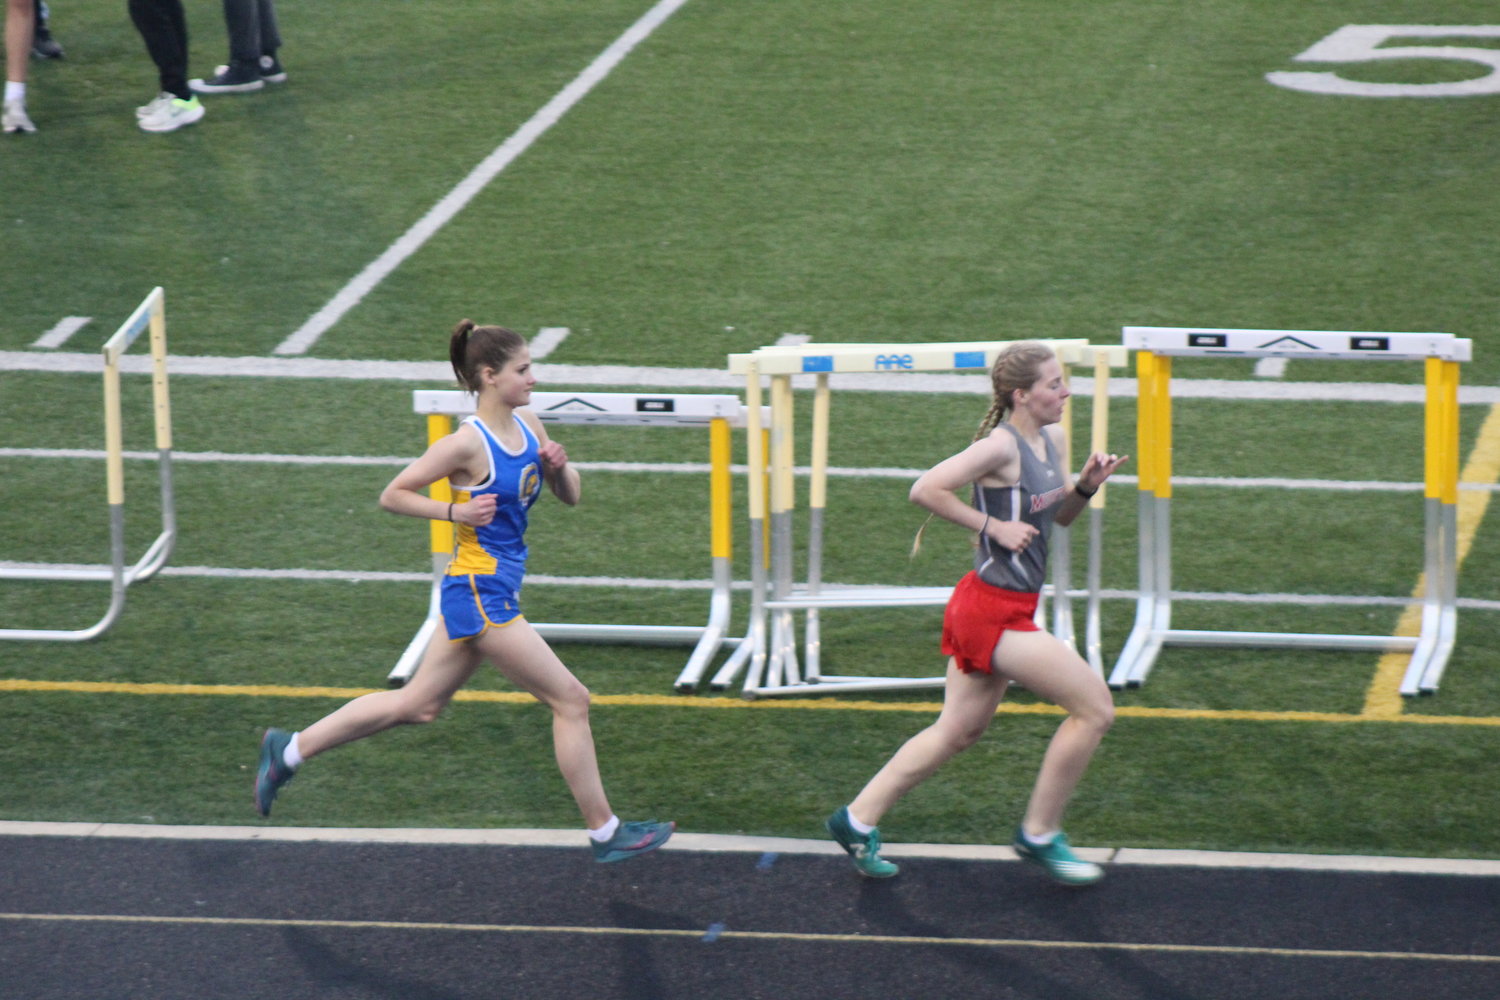 Crawfordsville’s Sophia Melevage and Southmont’s Faith allen keep pace with one another in the 1600 meter run at the Athenian Invite. Melevage would surpass Allen for the win.